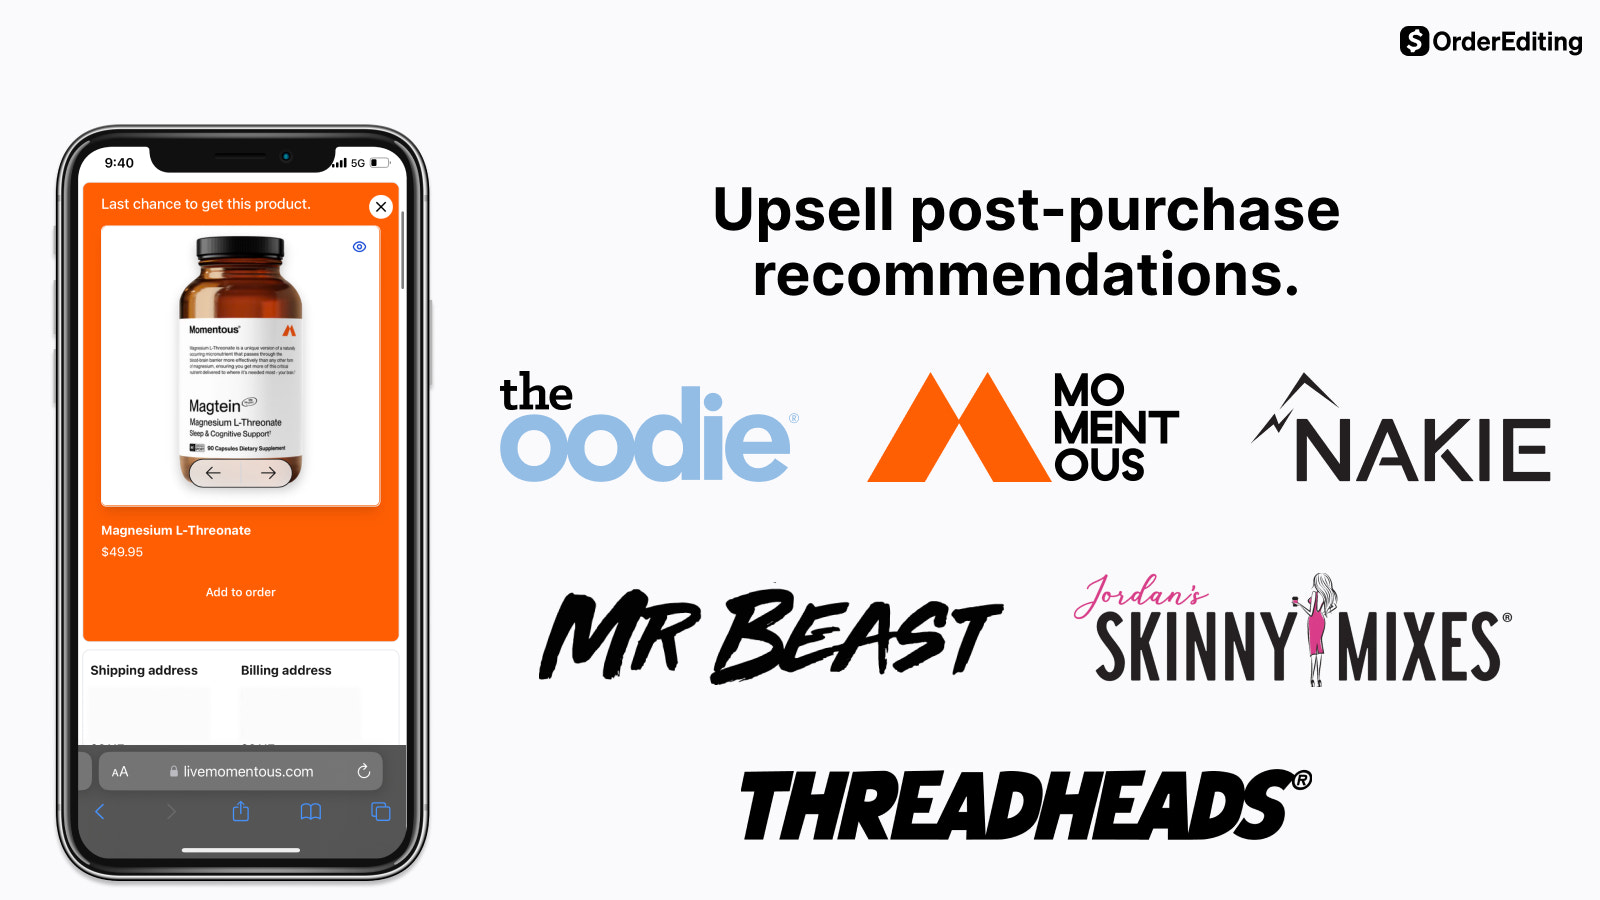 Upsell post-purchase recommendations